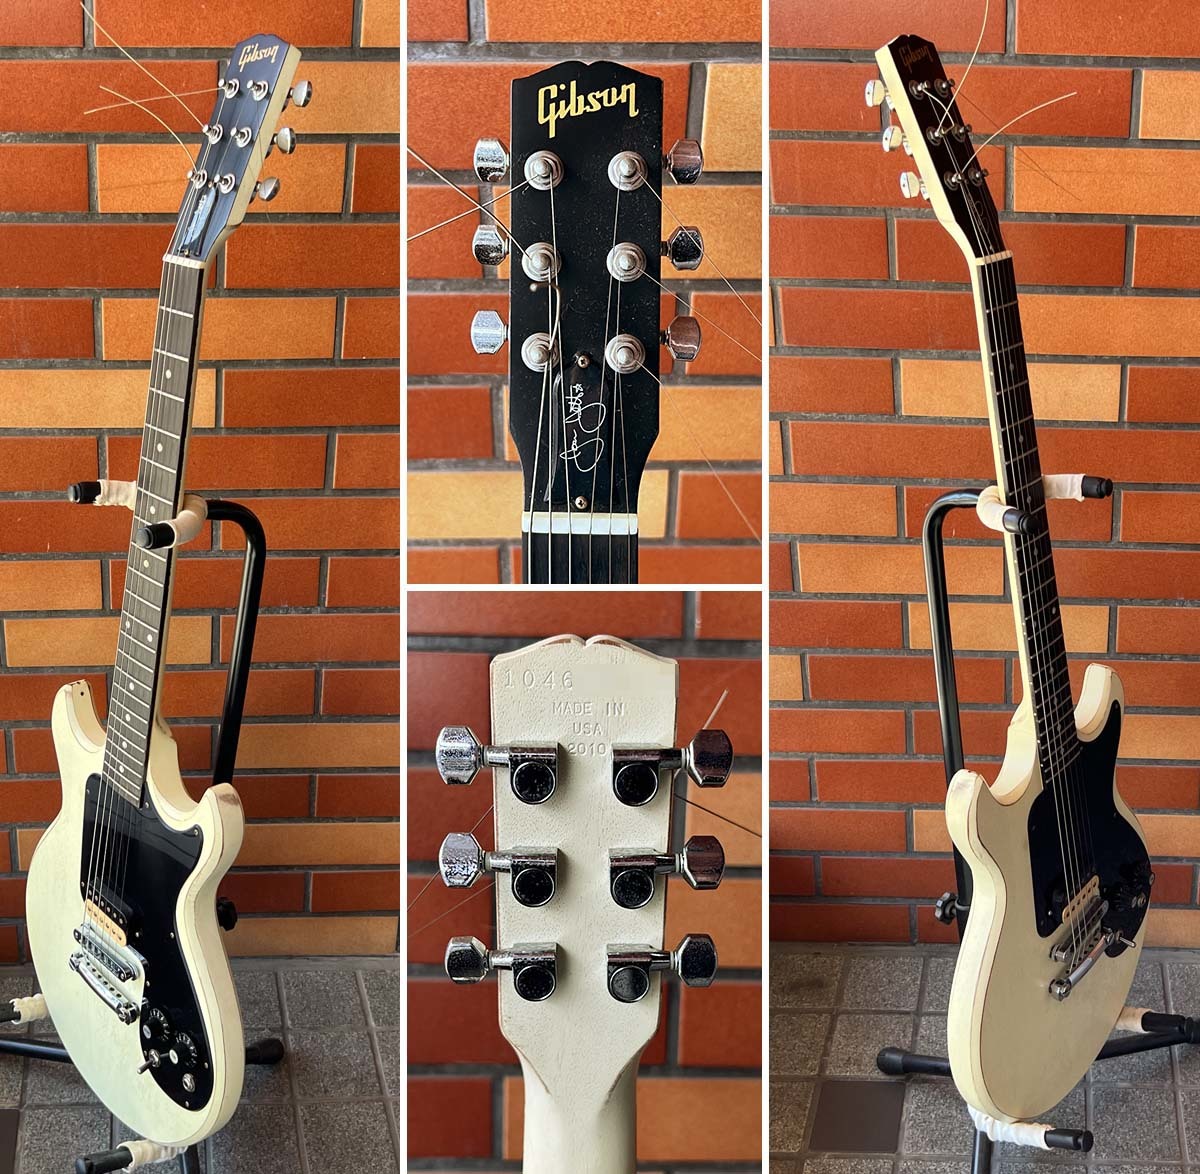 ● Gibson Joan Jett Melody Maker Worn White 2010年製 ギブソン ジョーン・ジェット メロディ メーカー ハードケース付 Made in USA _画像2